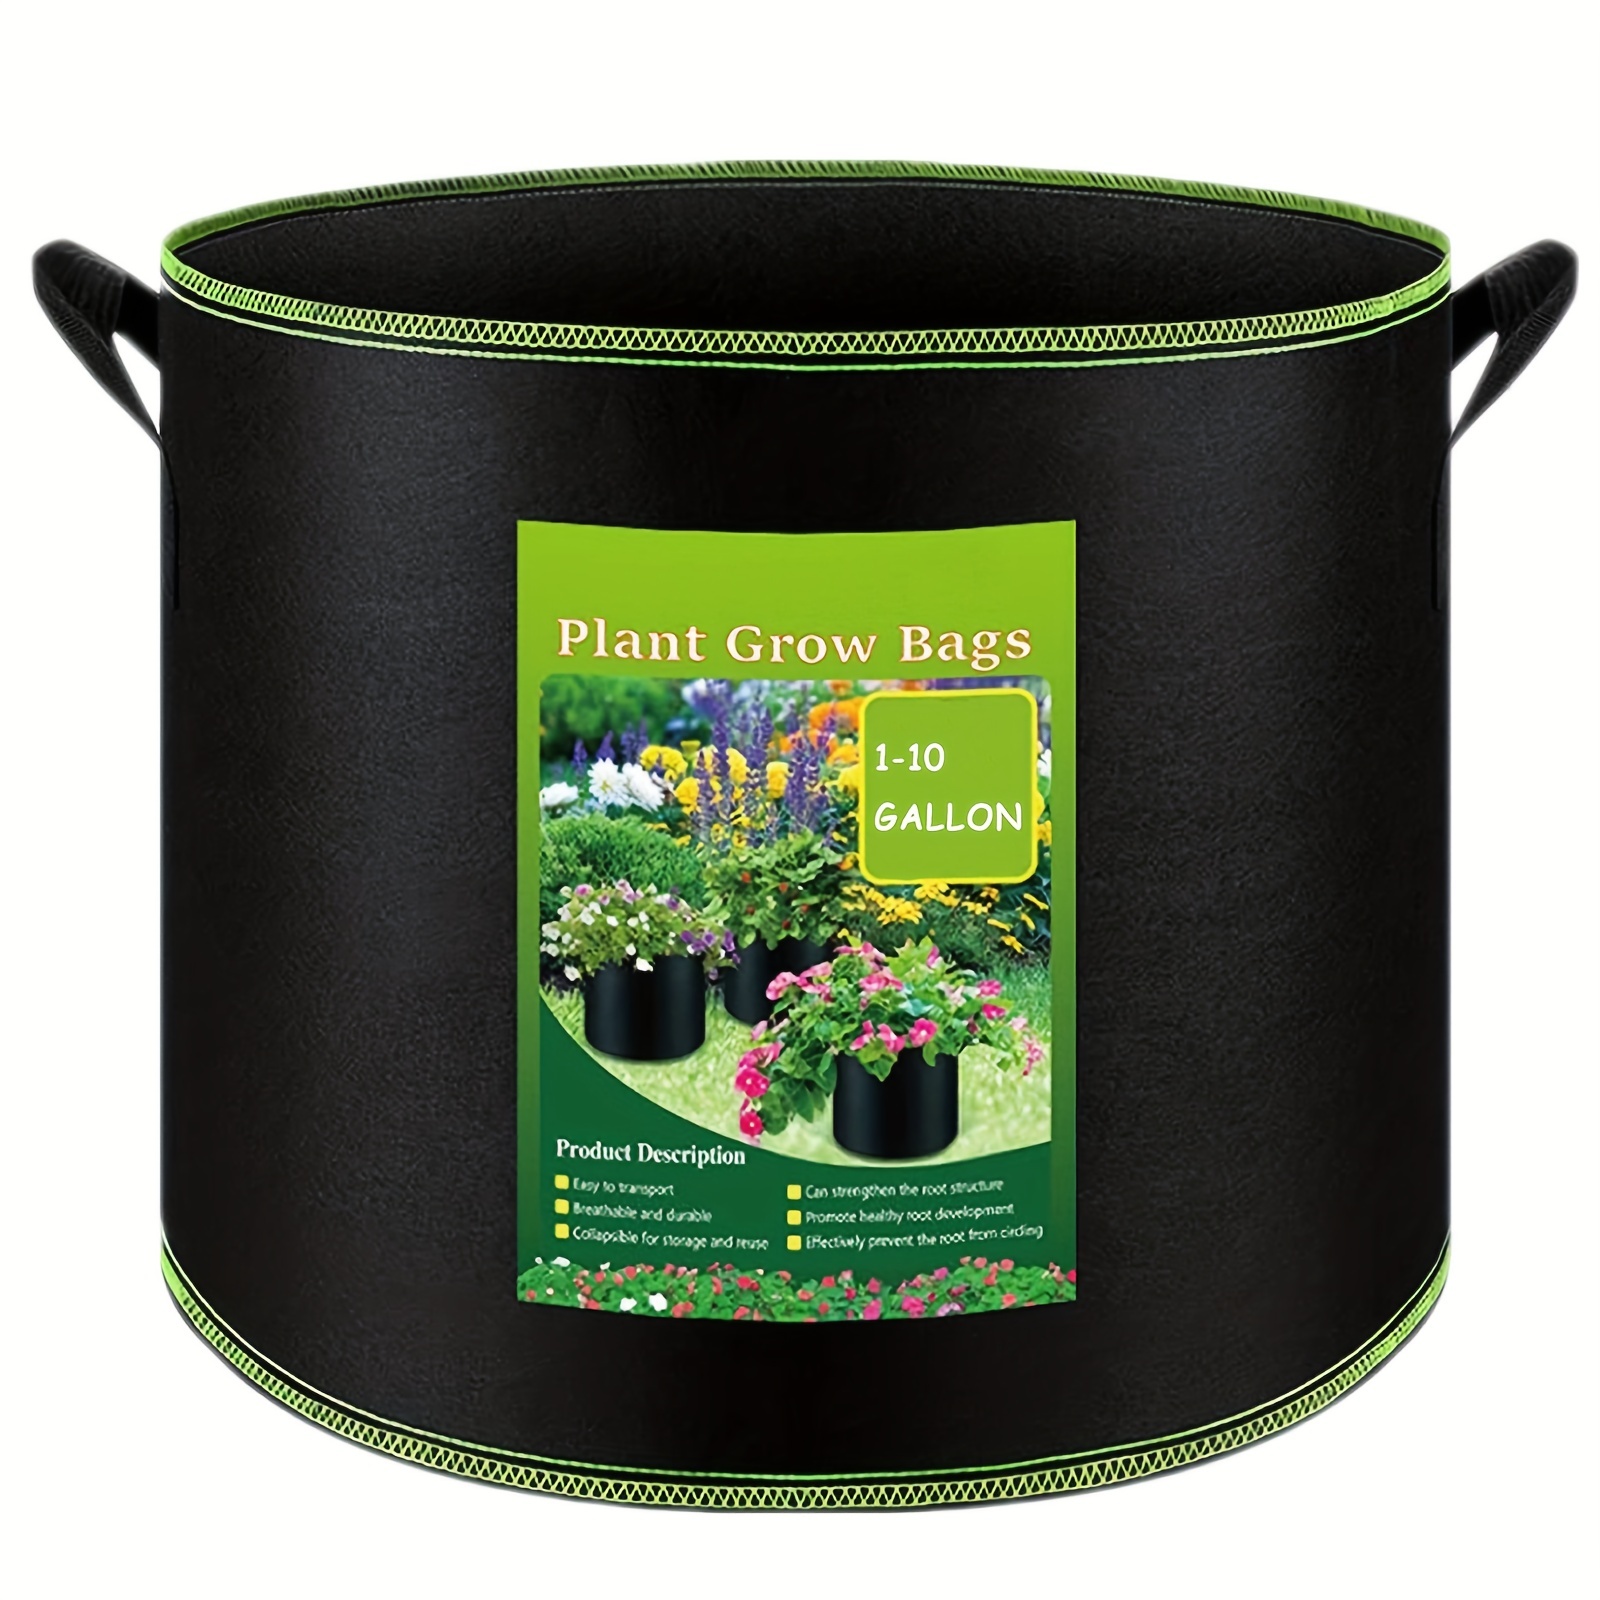 

1pc Grow Bags Heavy Duty Aeration Fabric Pots Thickened Non-woven Fabric Pots Plant Grow Bags With Handles For Fruits, Vegetables, And Flowers 5 Gallon / 7 Gallon / 10 Gallon